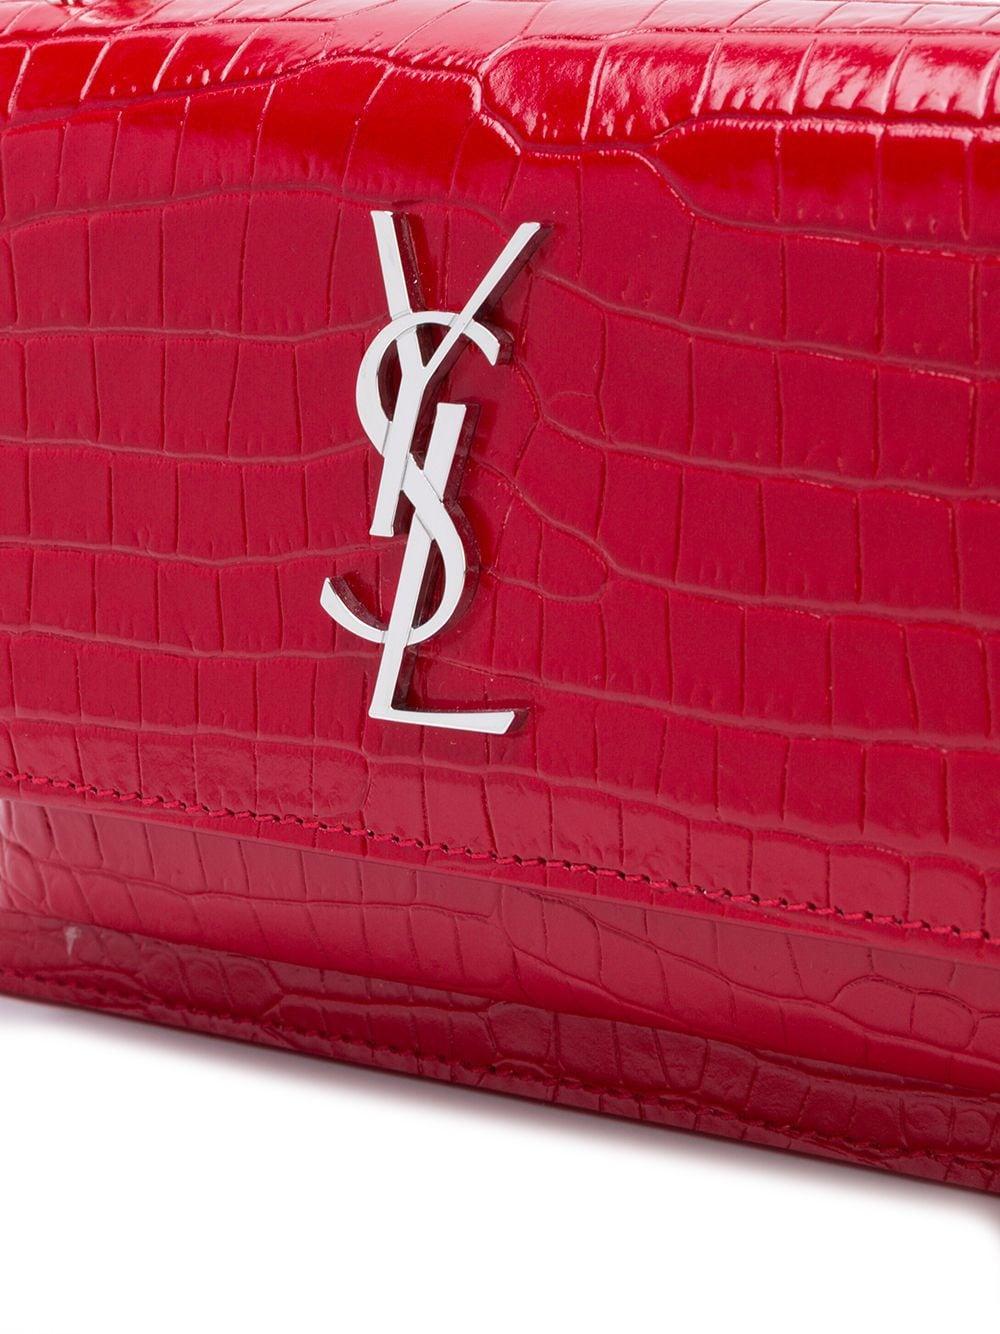 Saint Laurent Sunset Small Croc-effect Patent-leather Shoulder Bag in Red